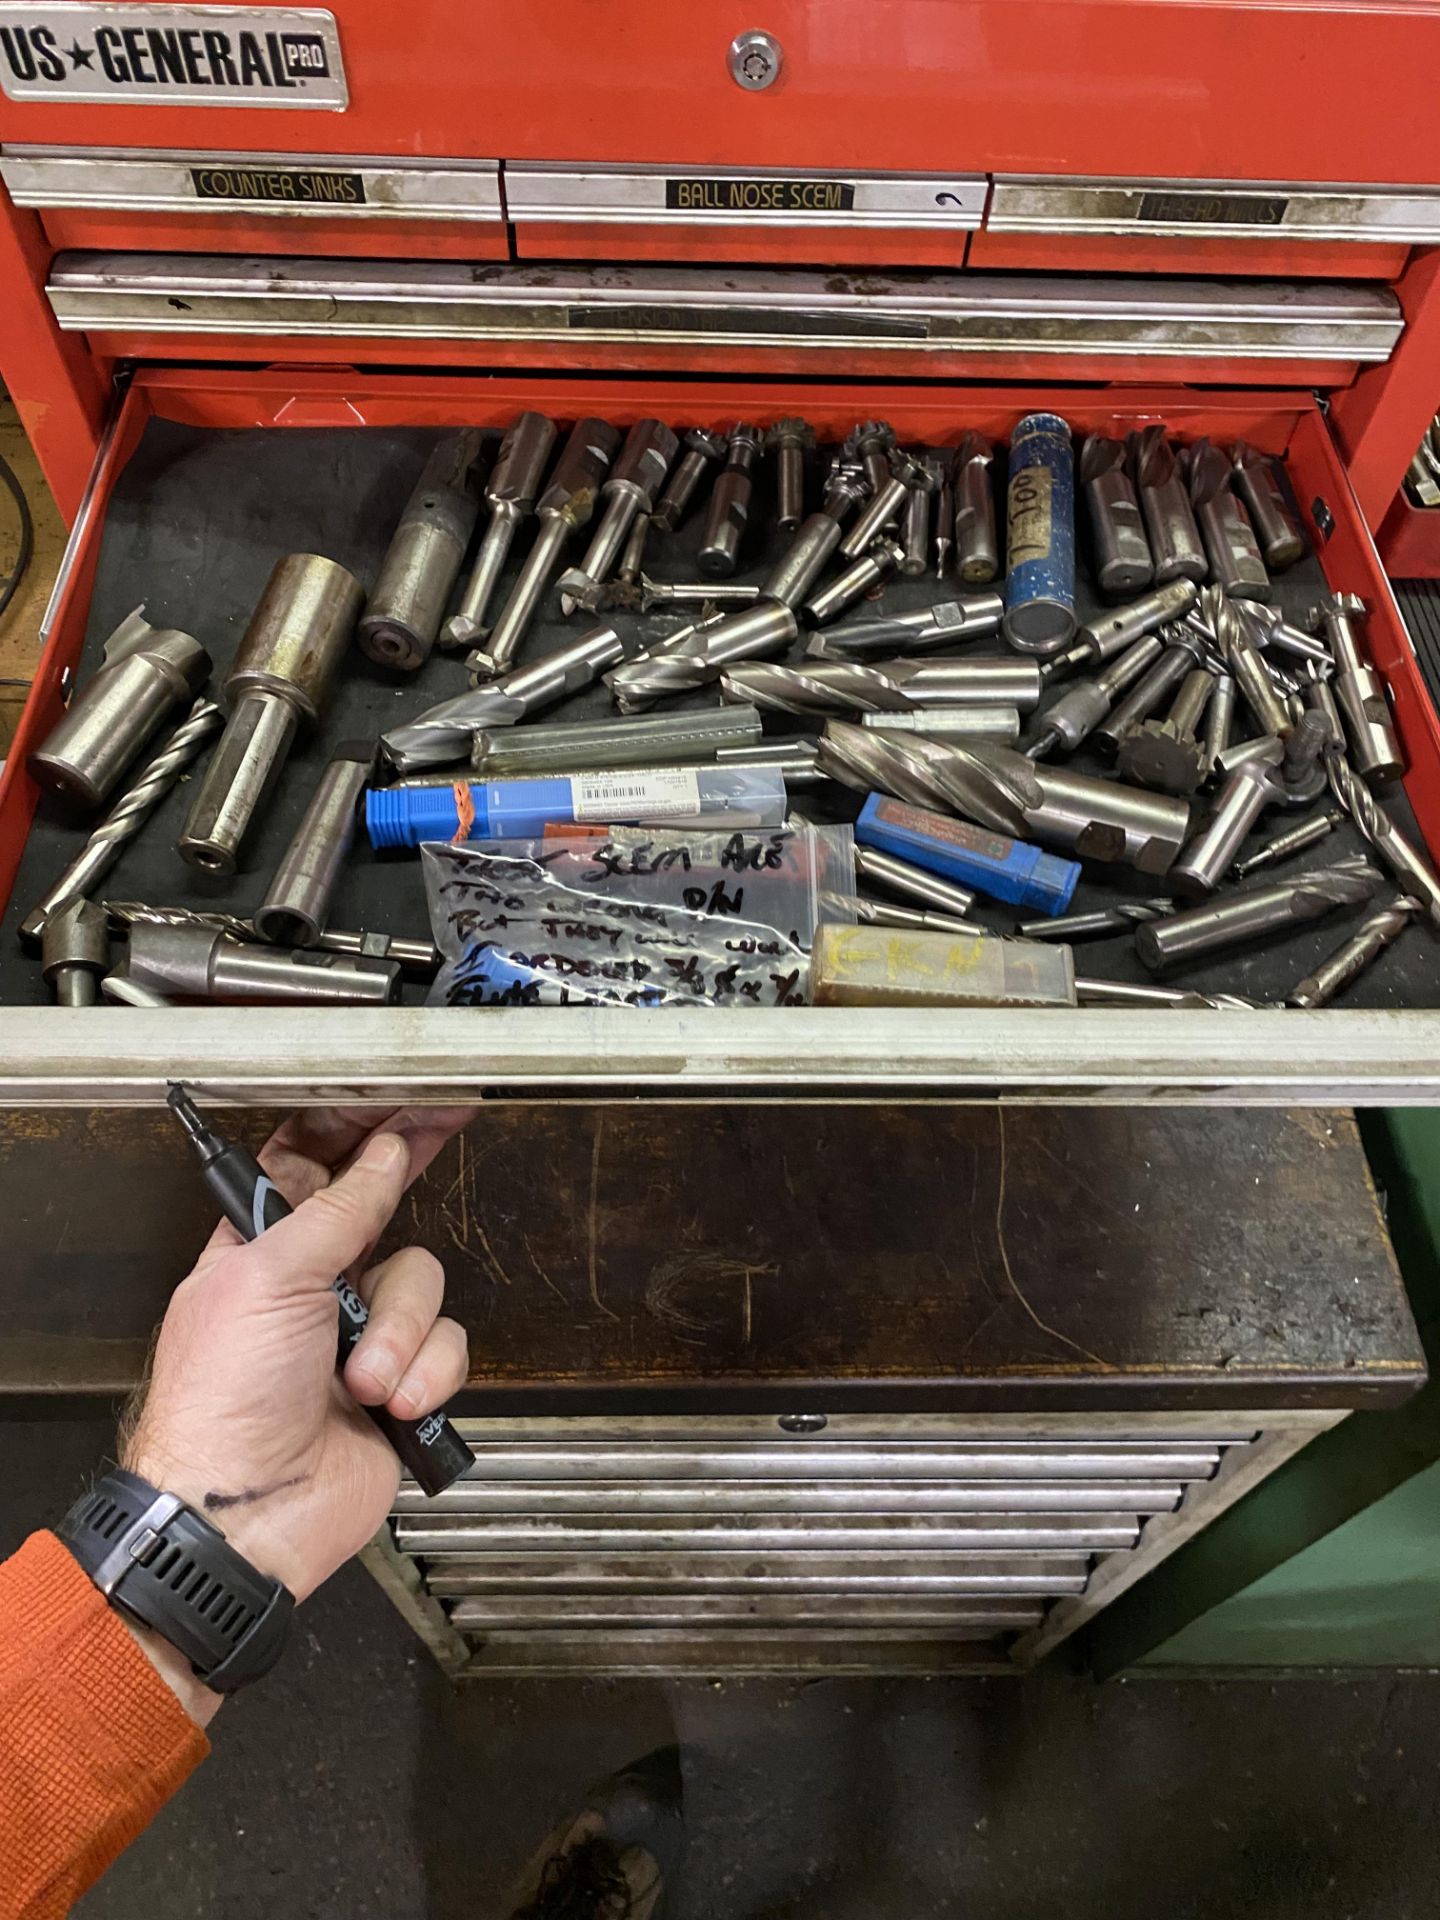 US General 6 Drawer Tool Box w/ Contents - Image 5 of 8